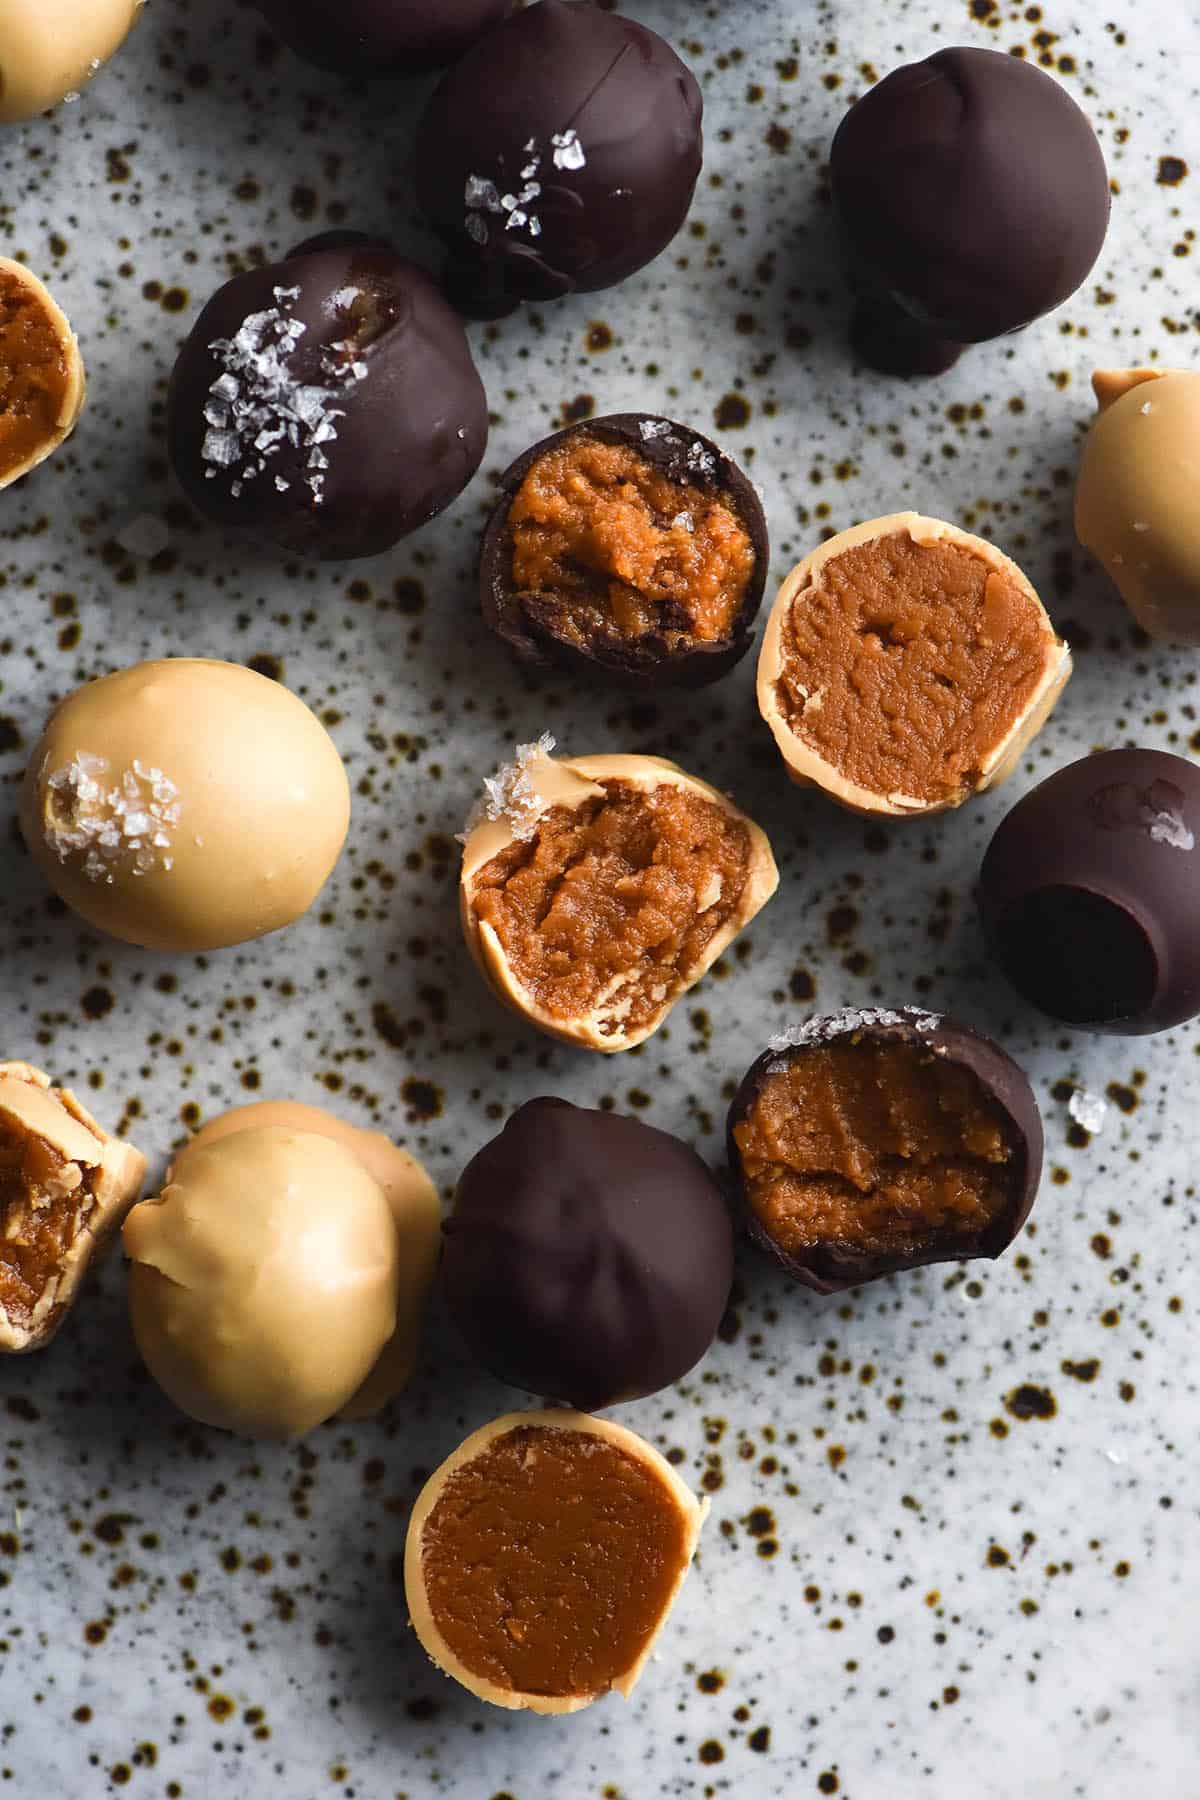 An aerial view of dark and white chocolate coated peanut truffes, some bitten into and some topped with a sprinkling of sea salt flakes. The truffles sit atop a white speckled ceramic plate